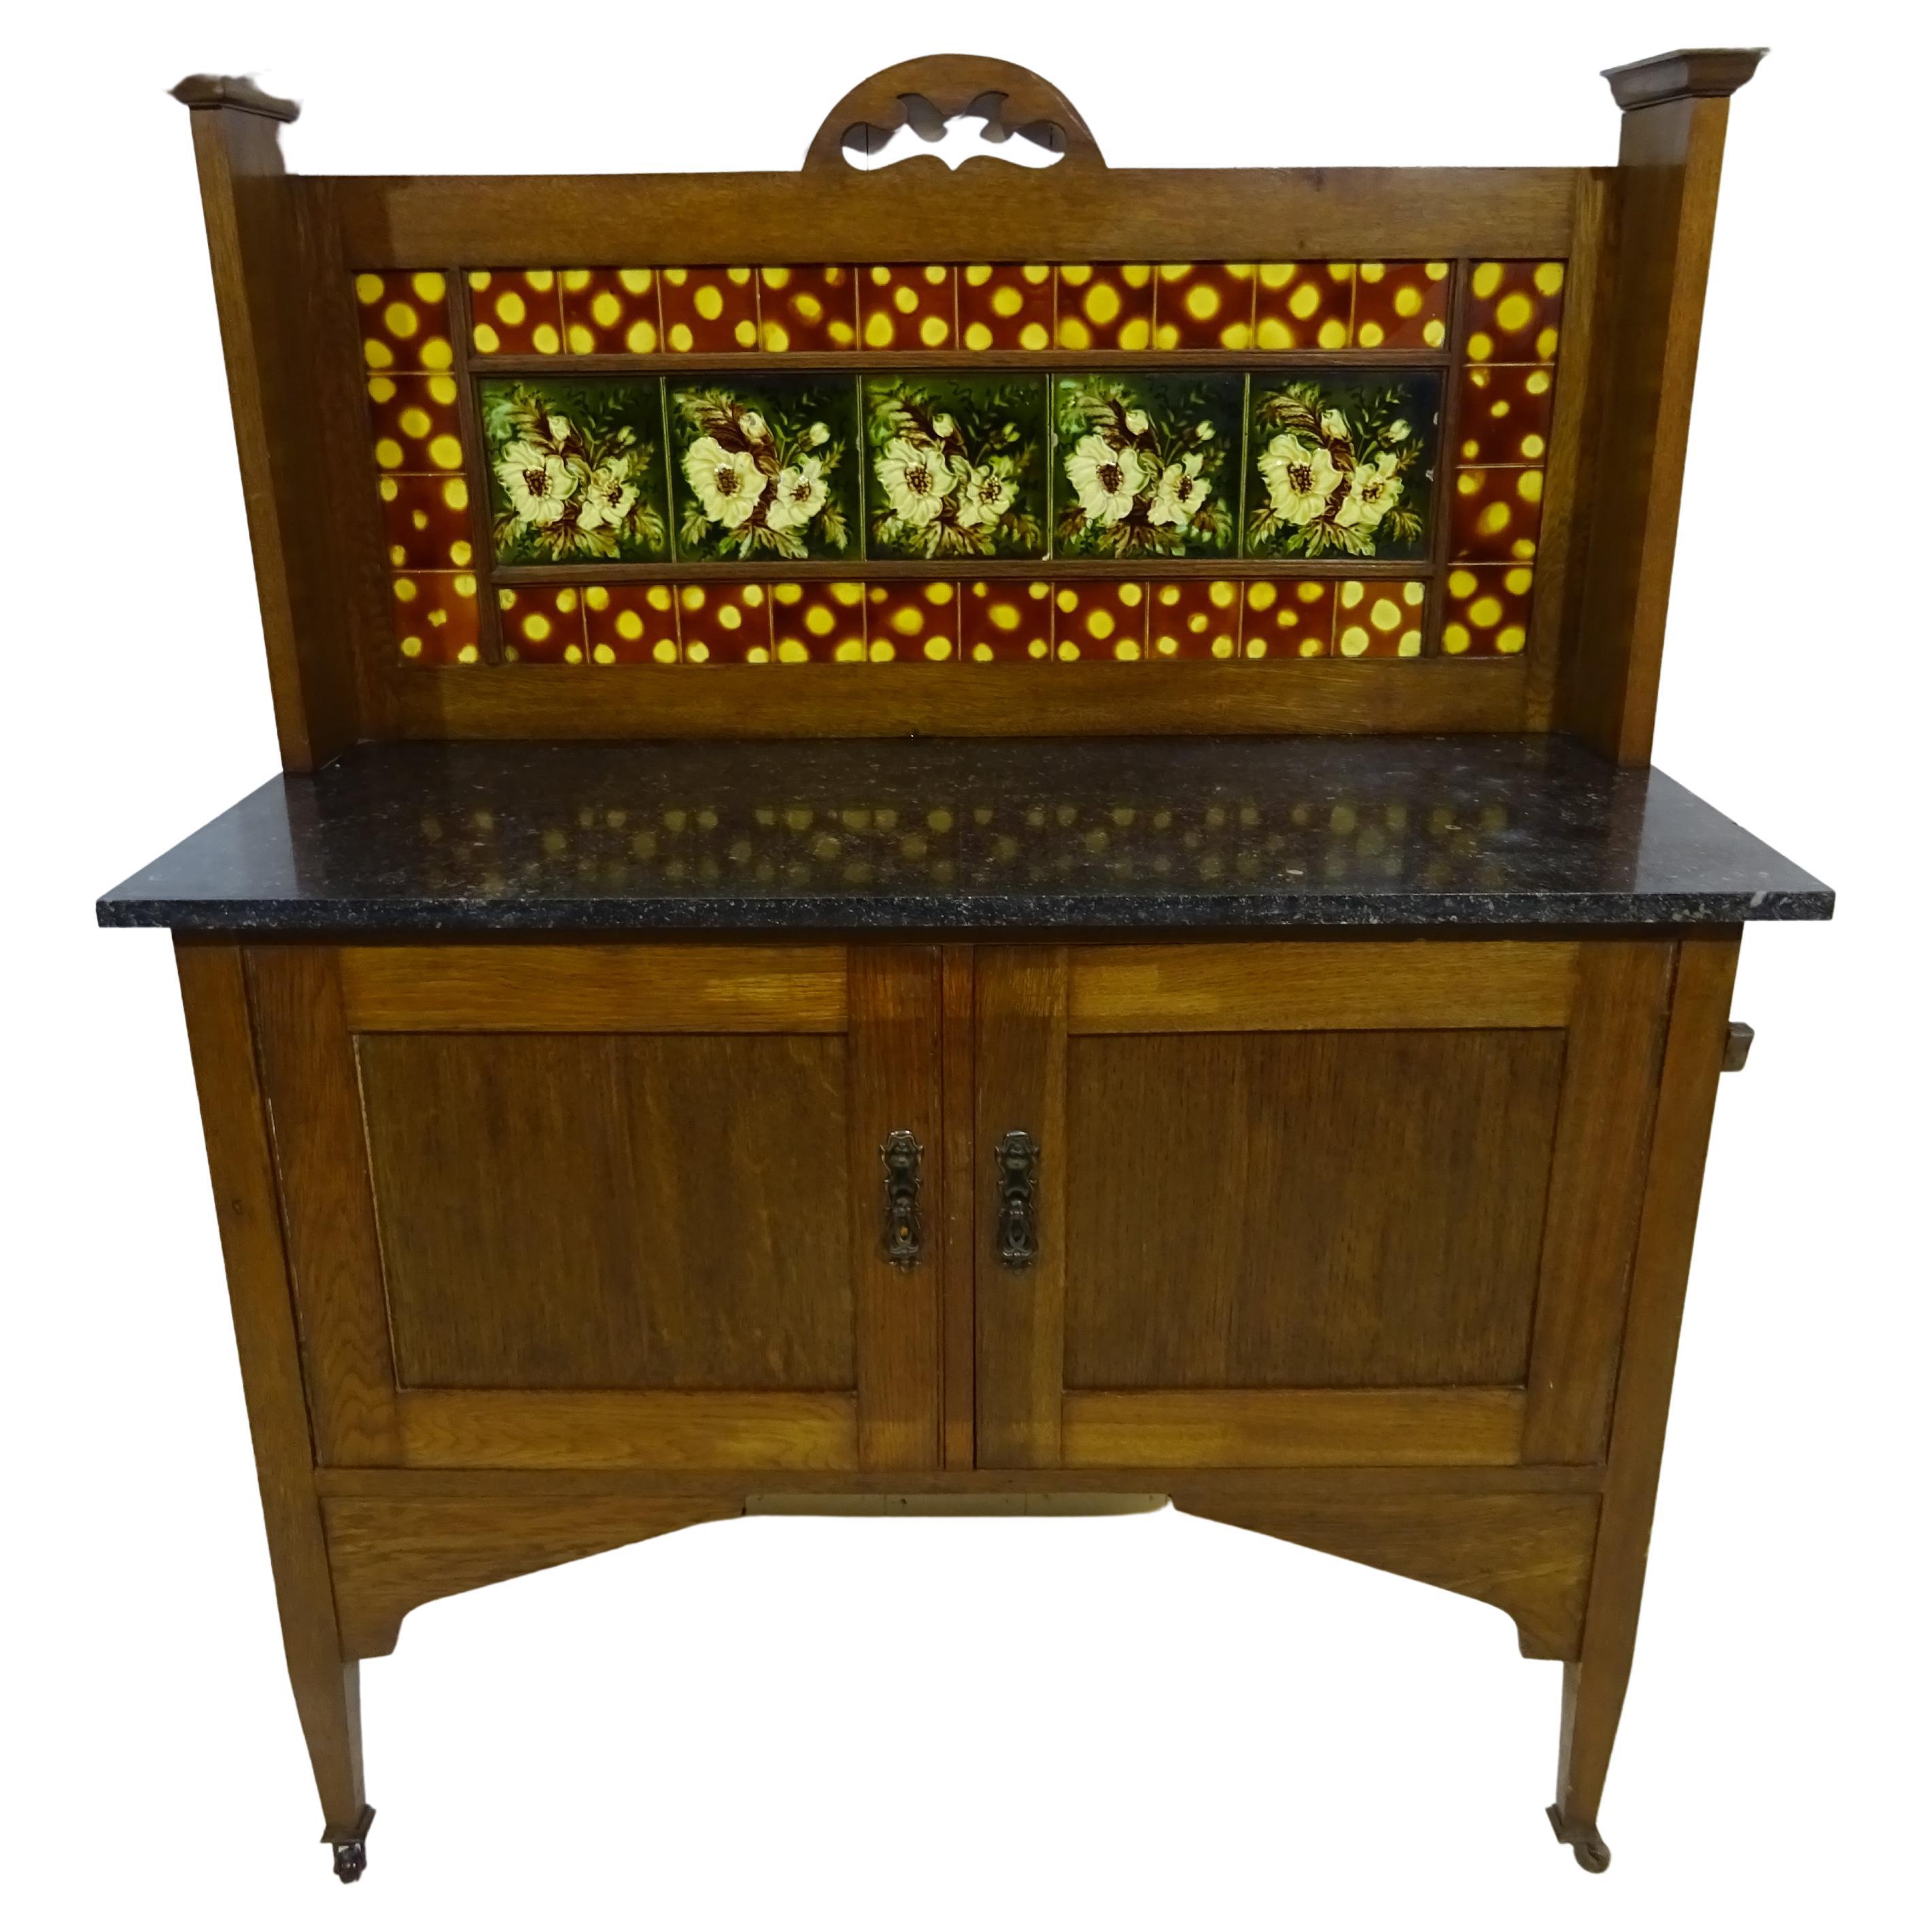 Victorian Marble Top Wash Stand in Oak with Floral Glazed Tiles